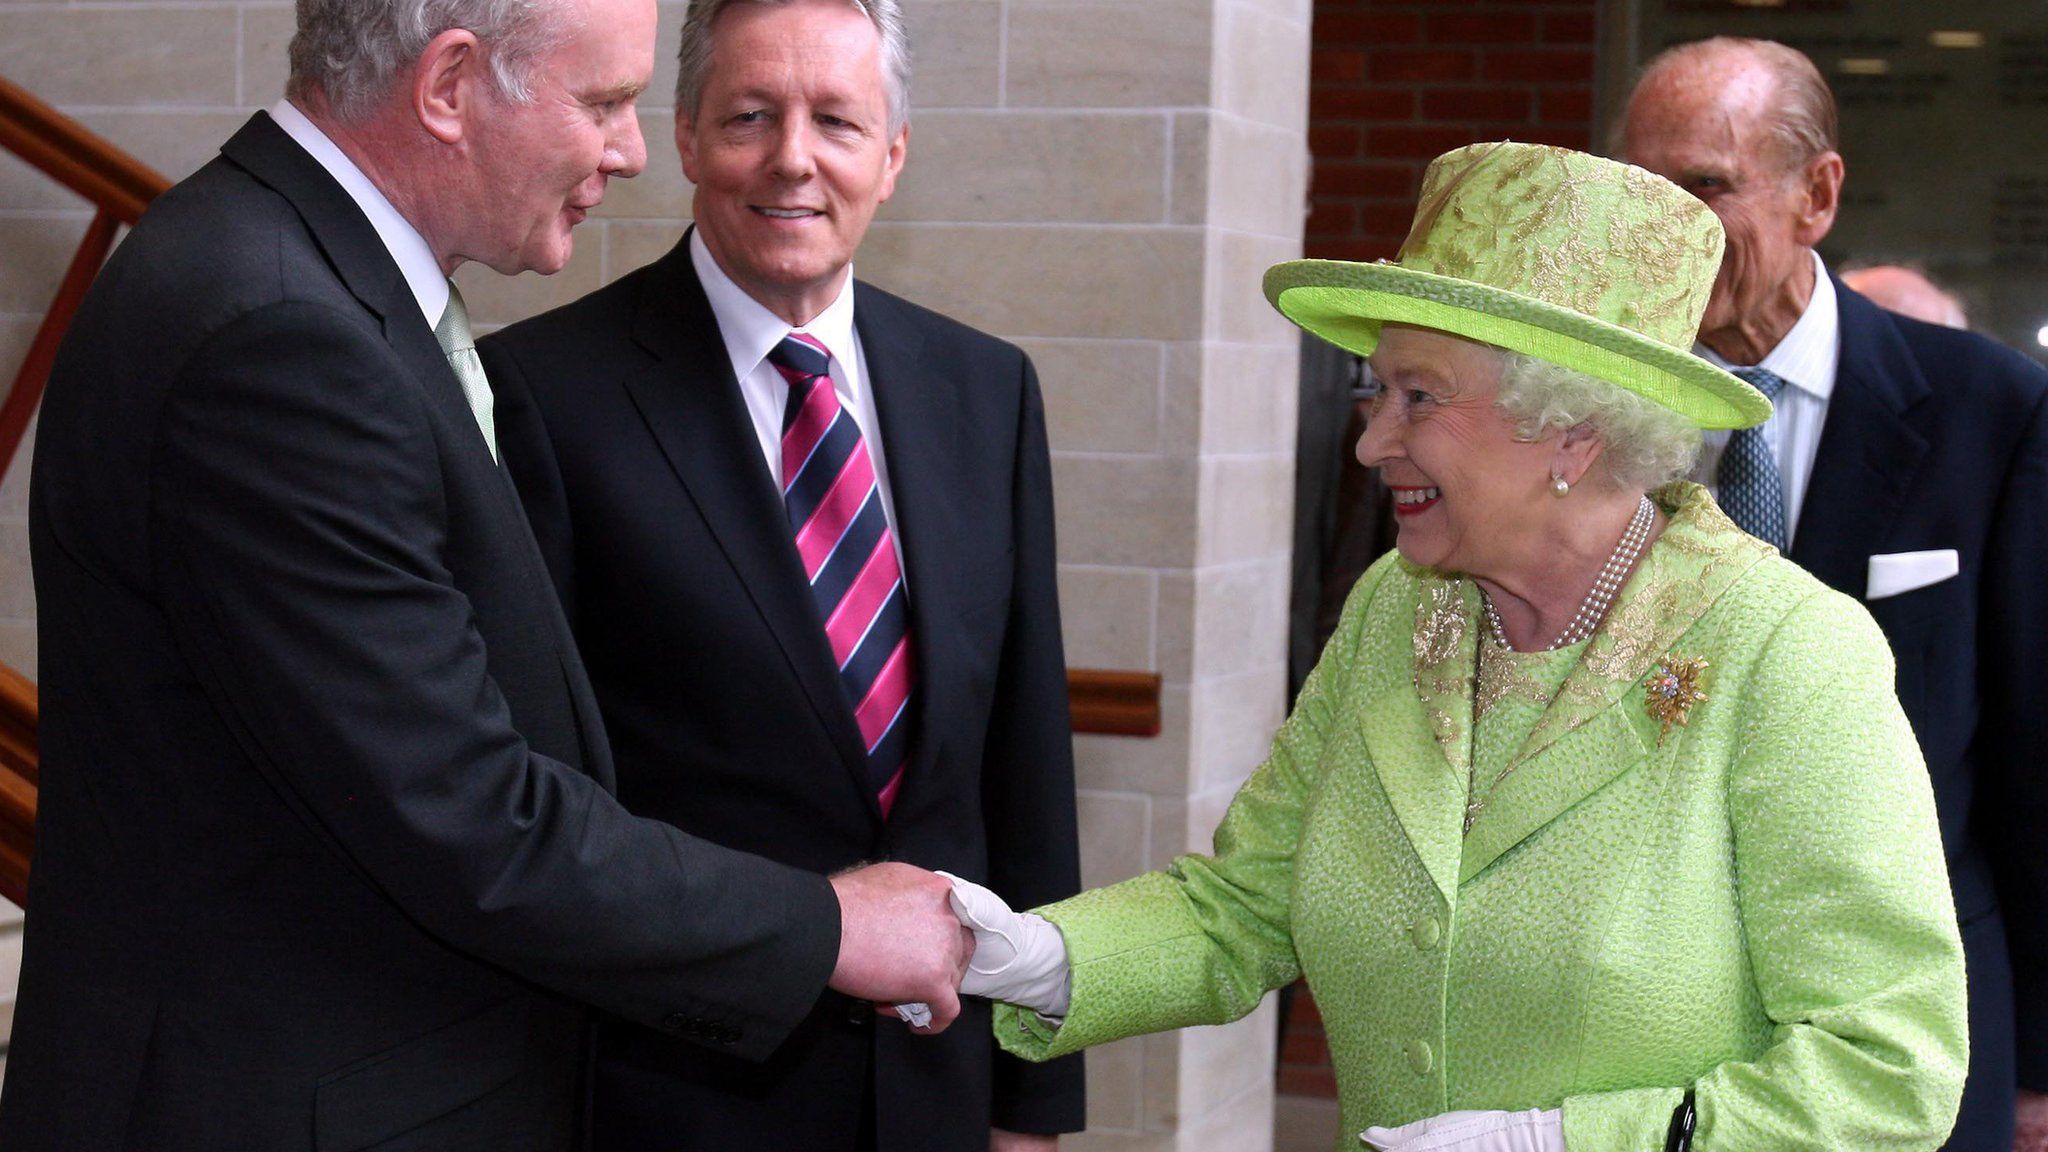 The eyes of the world were trained on this historic handshake with Martin McGuinness